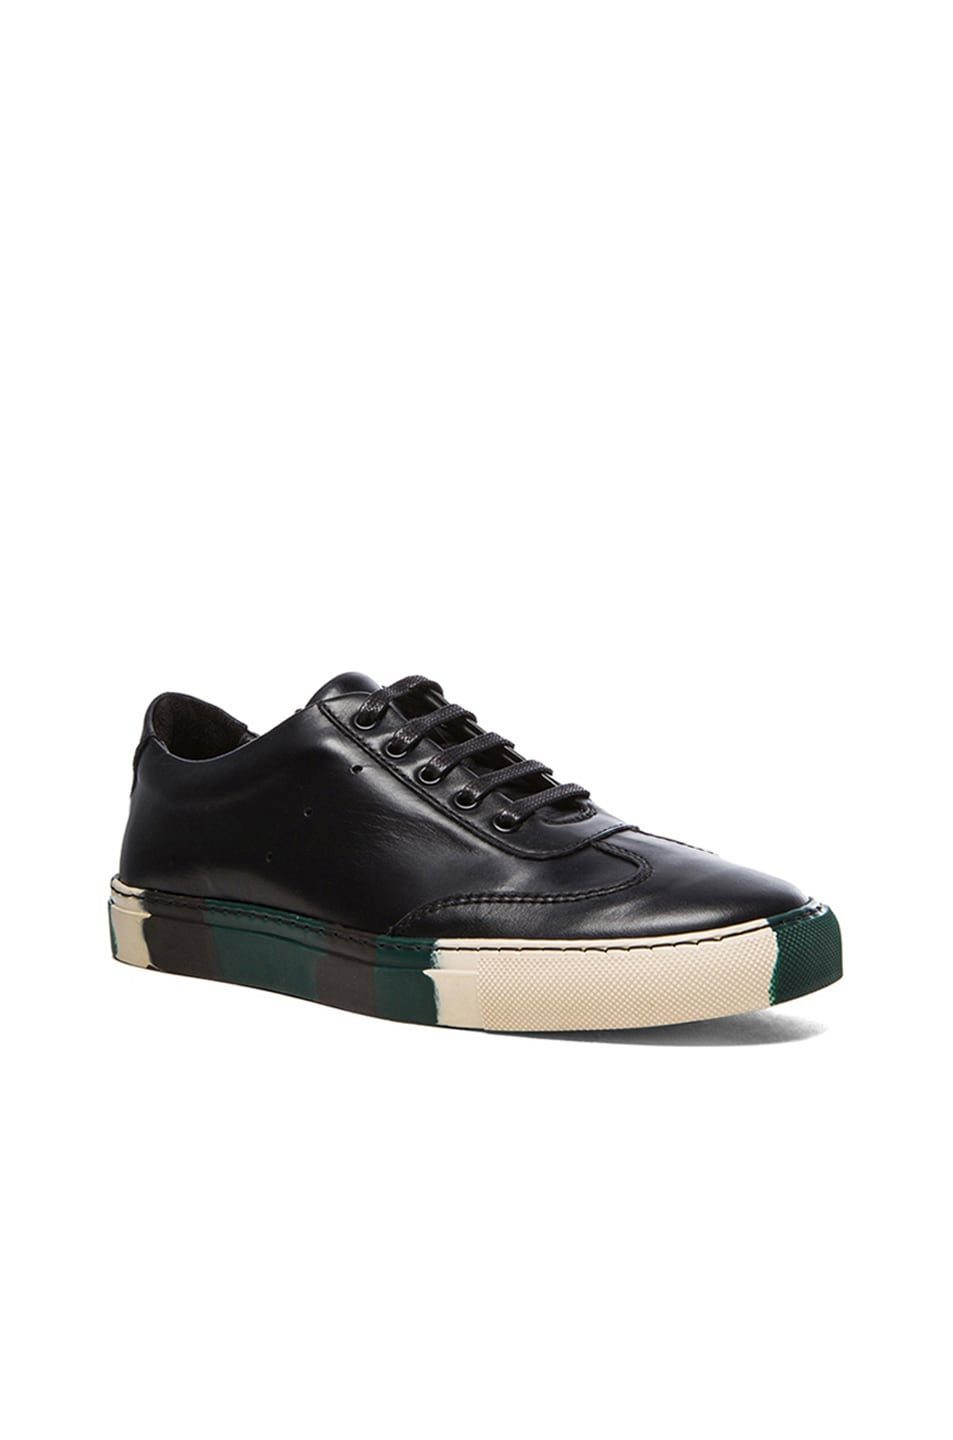 Image 1 of COMME des GARCONS SHIRT Leather Sneakers with Camouflage Sole in Black & Green